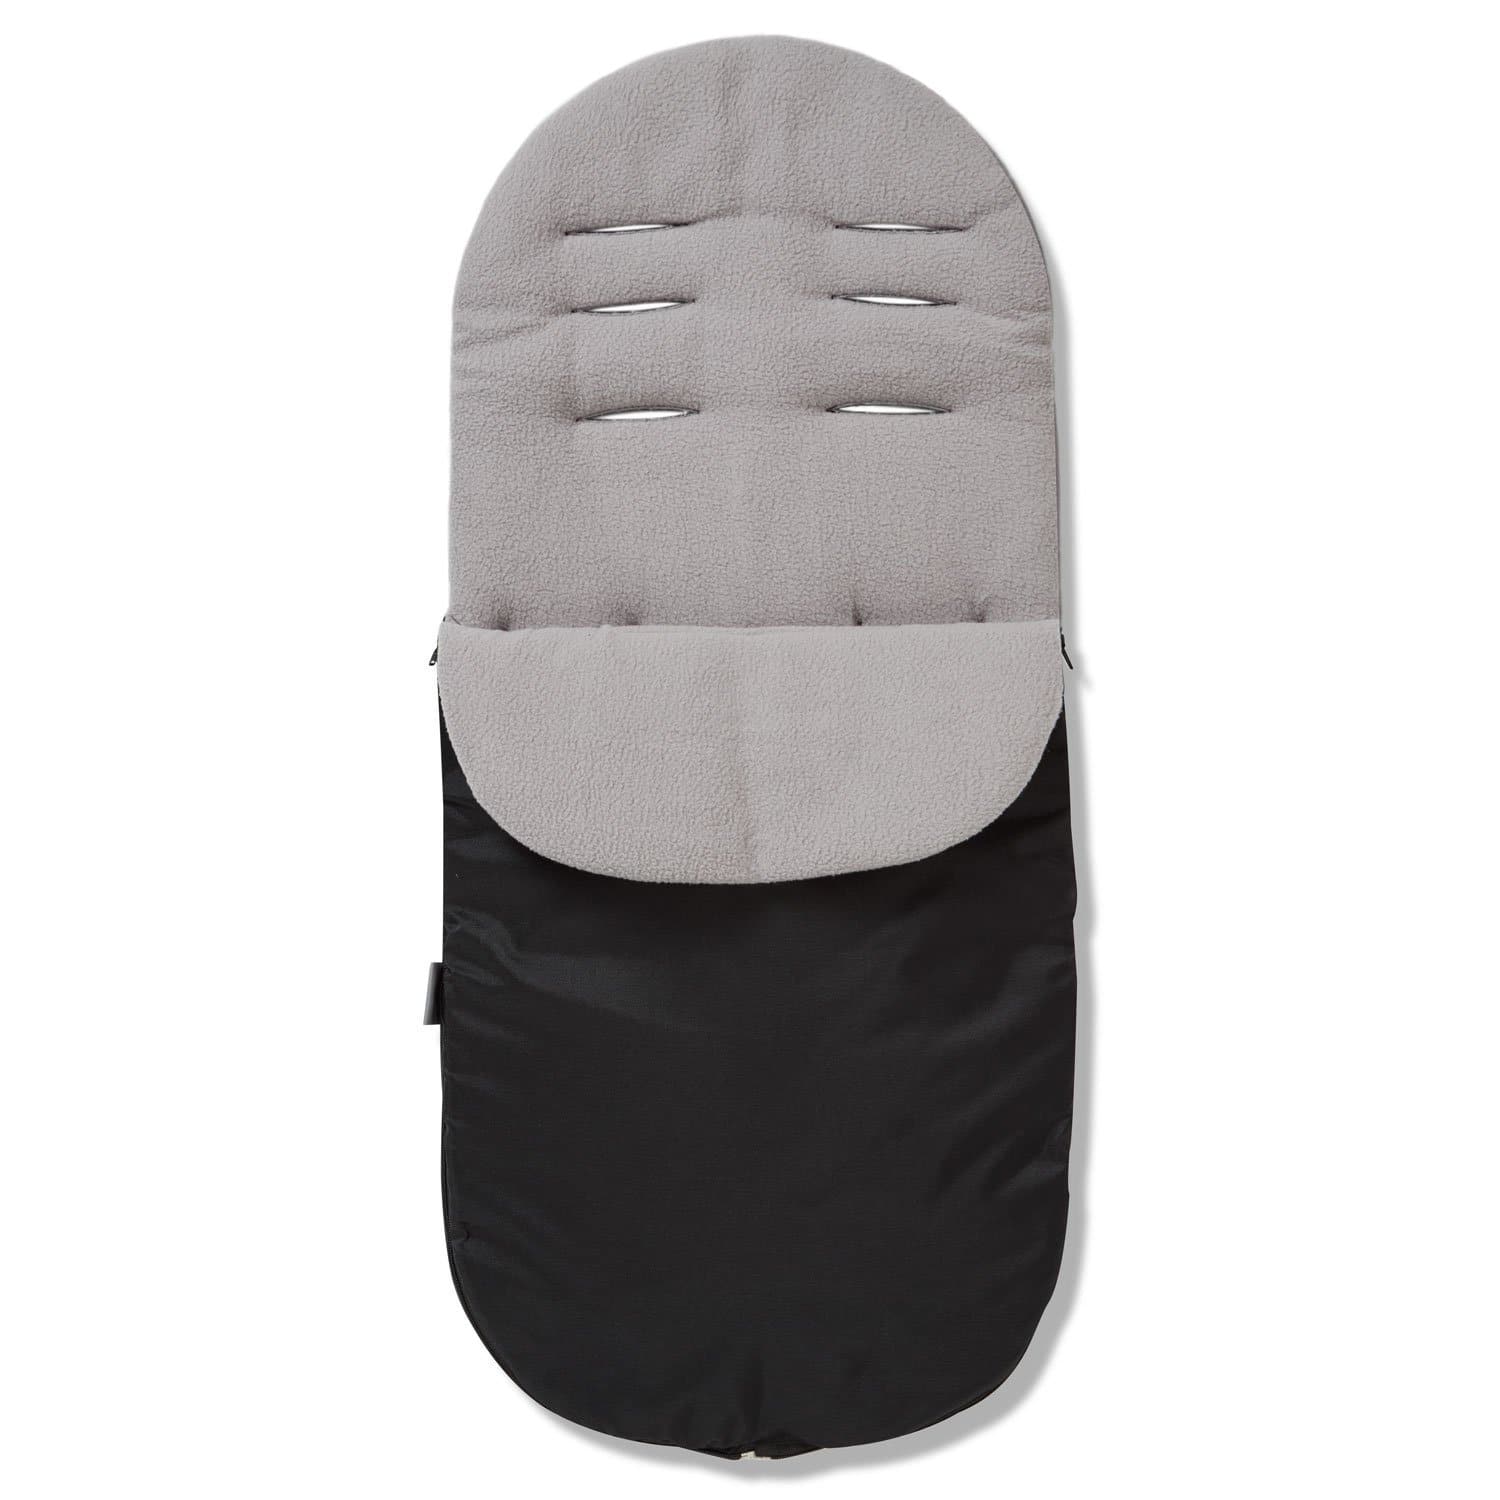 Footmuff / Cosy Toes Compatible with Bumbleride - For Your Little One